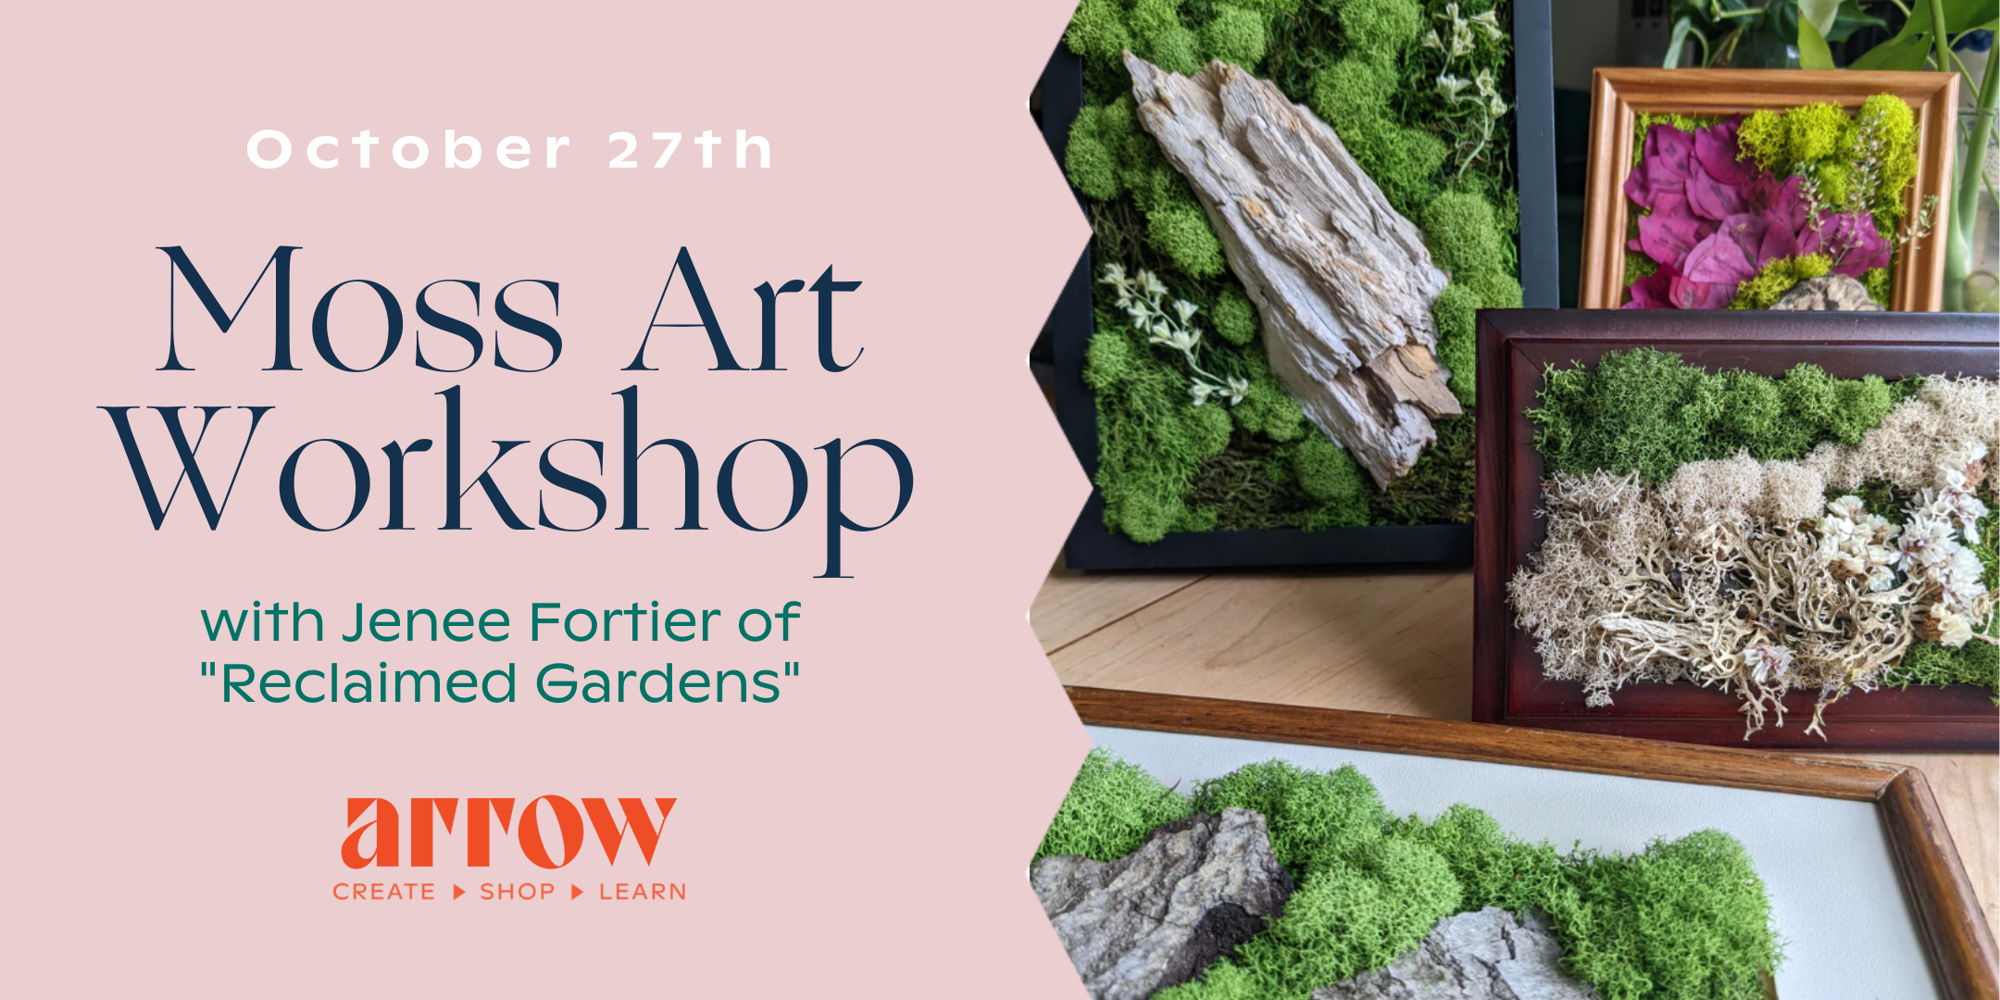 Moss Art Workshop with Jenee Fortier/Reclaimed Gardens promotional image